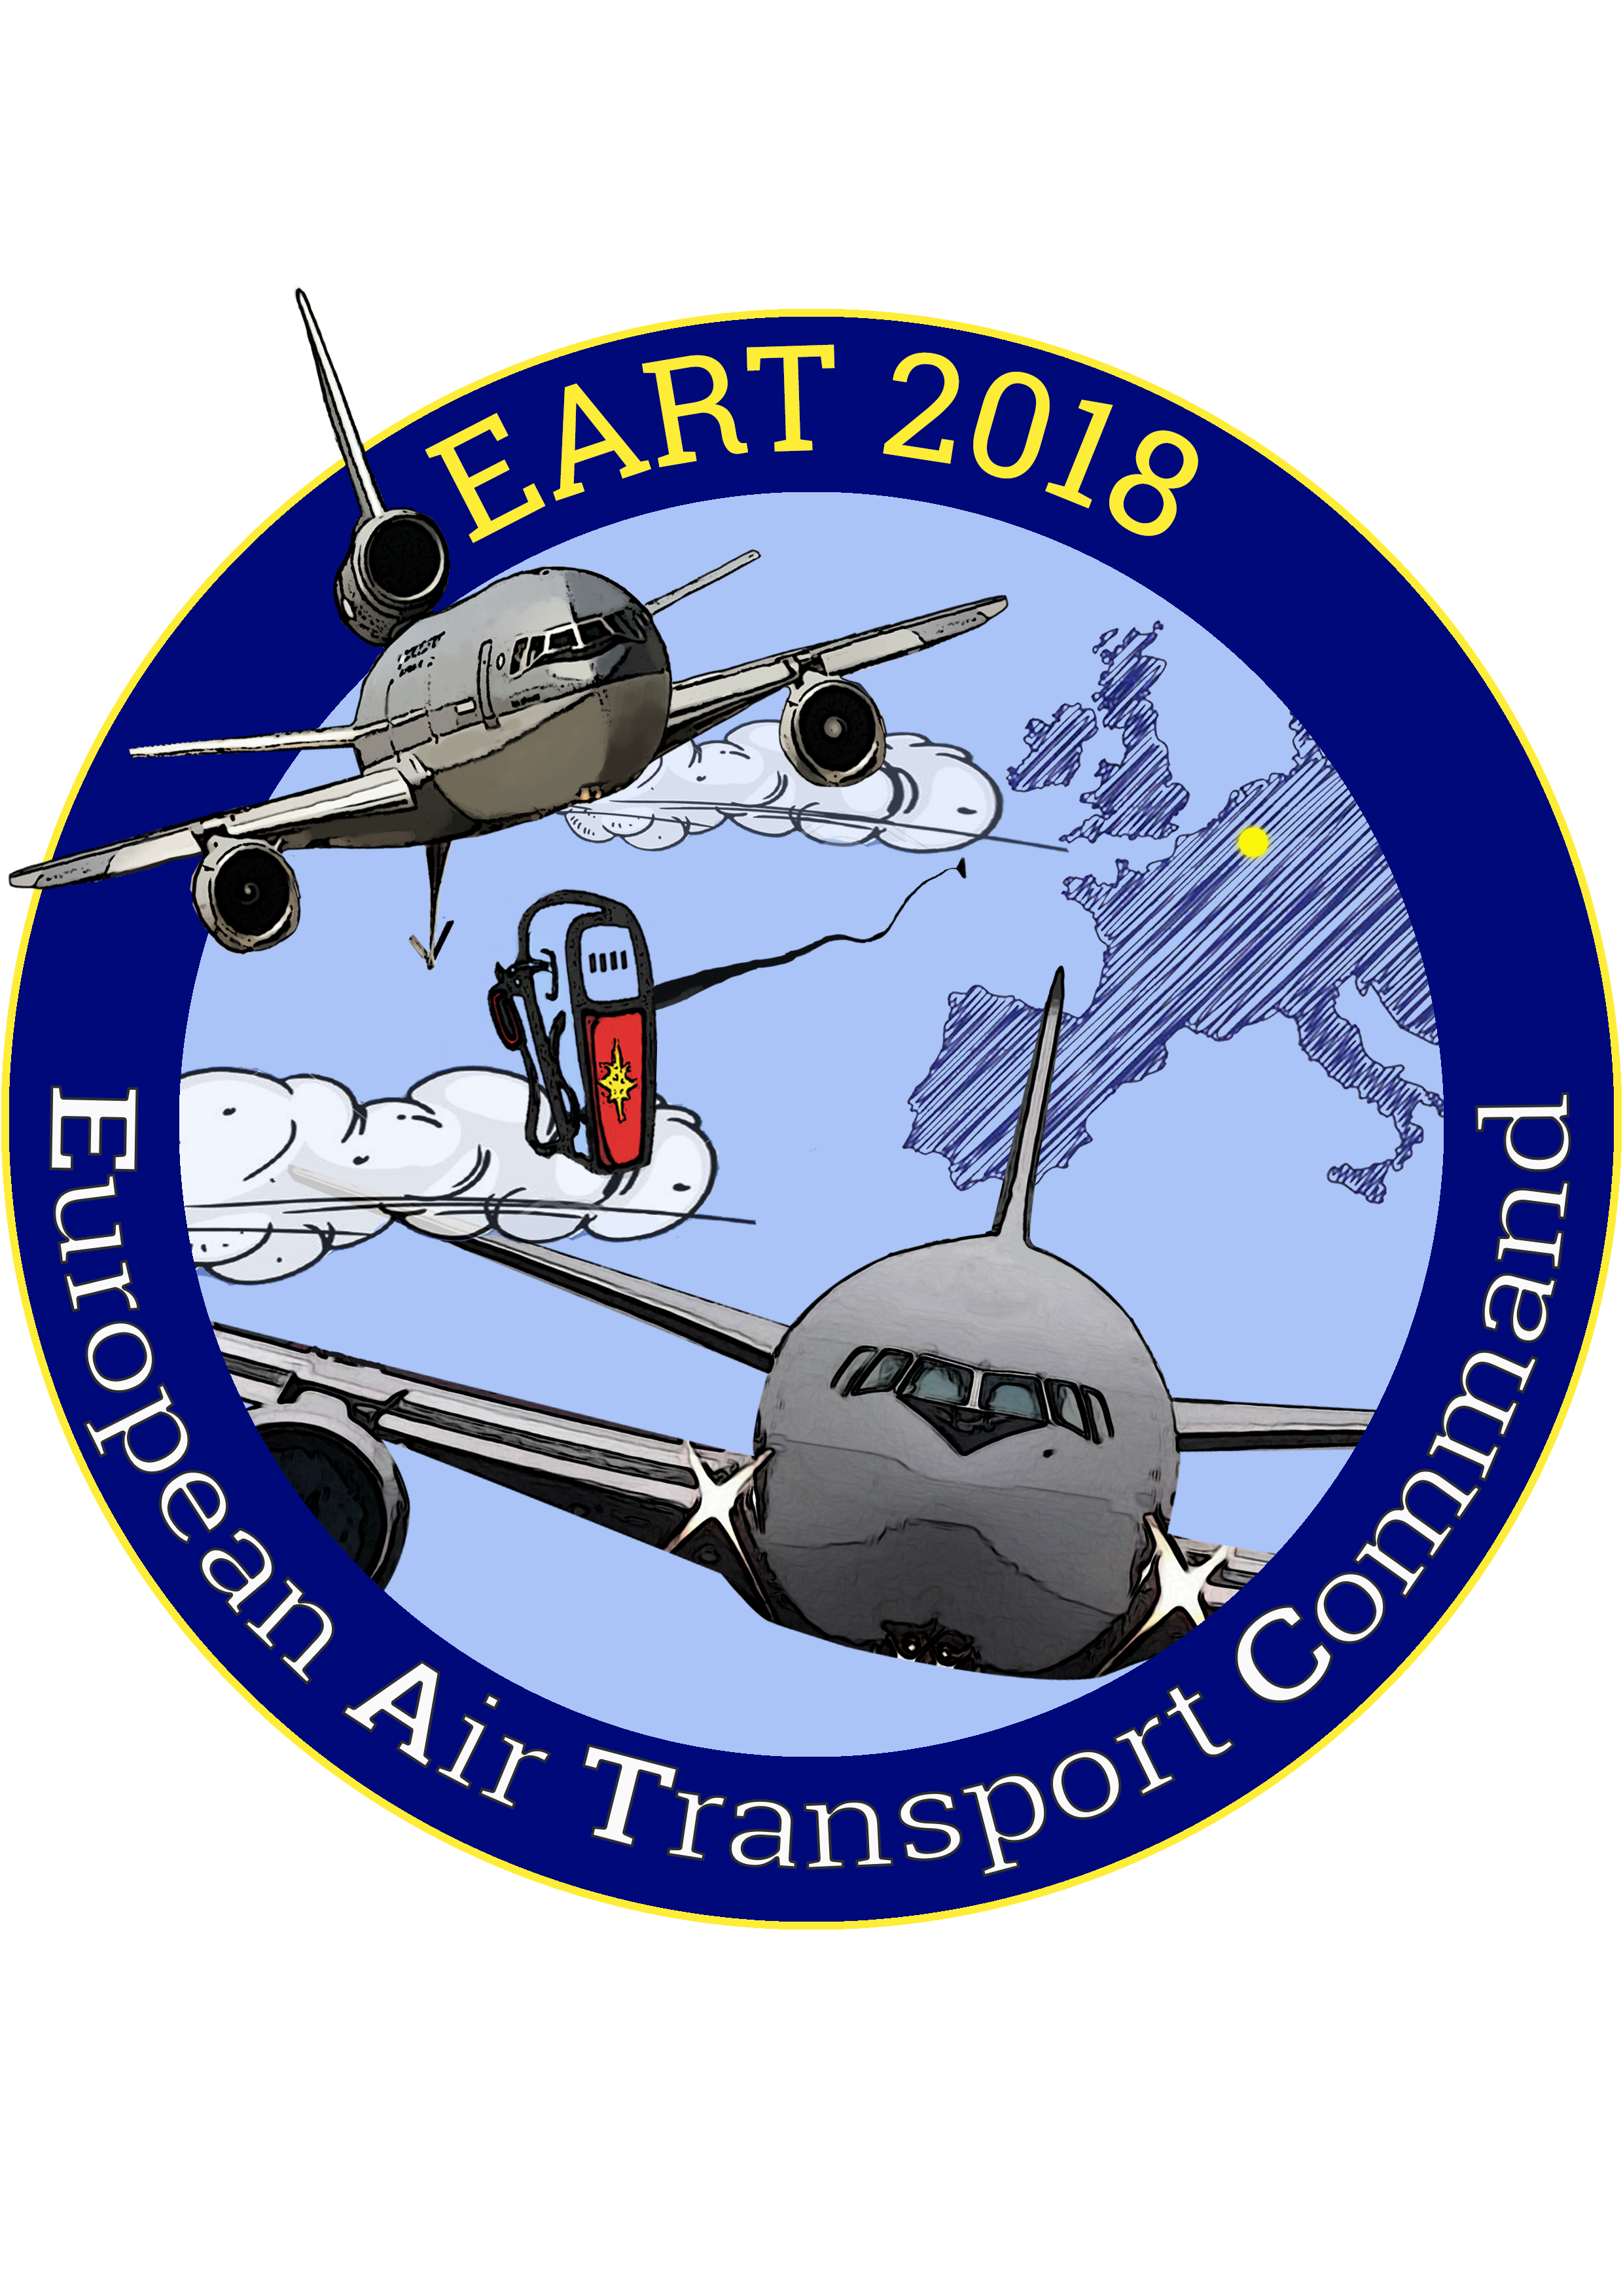 A new edition of EART will be launched on 08 April